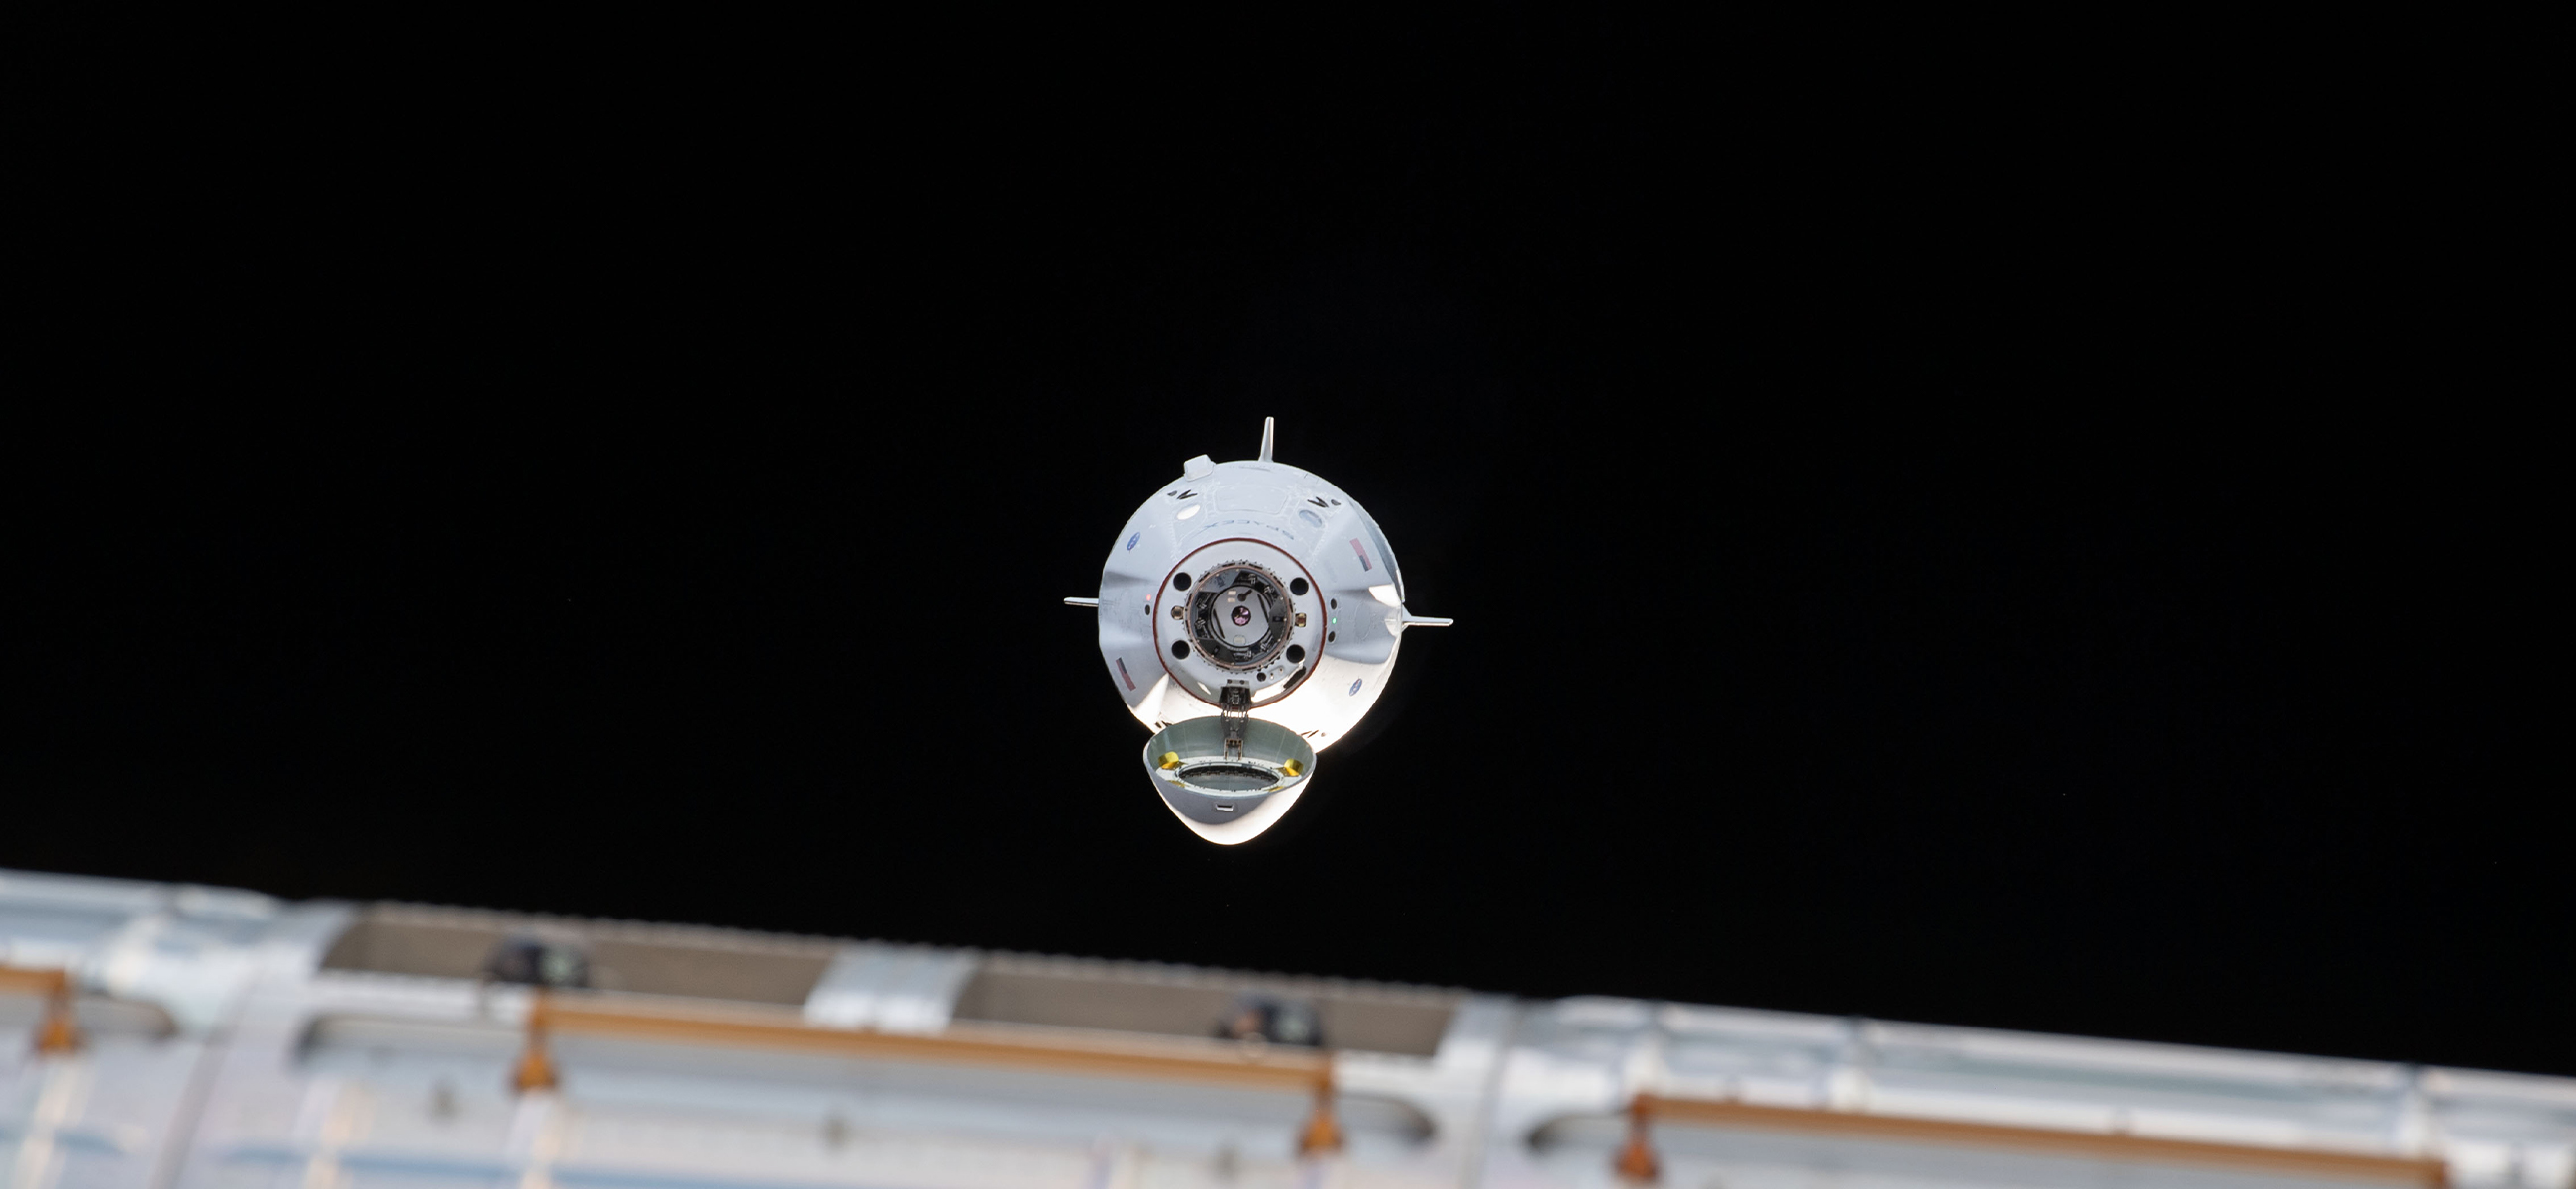 SpaceX Crew Dragon approaches the ISS.